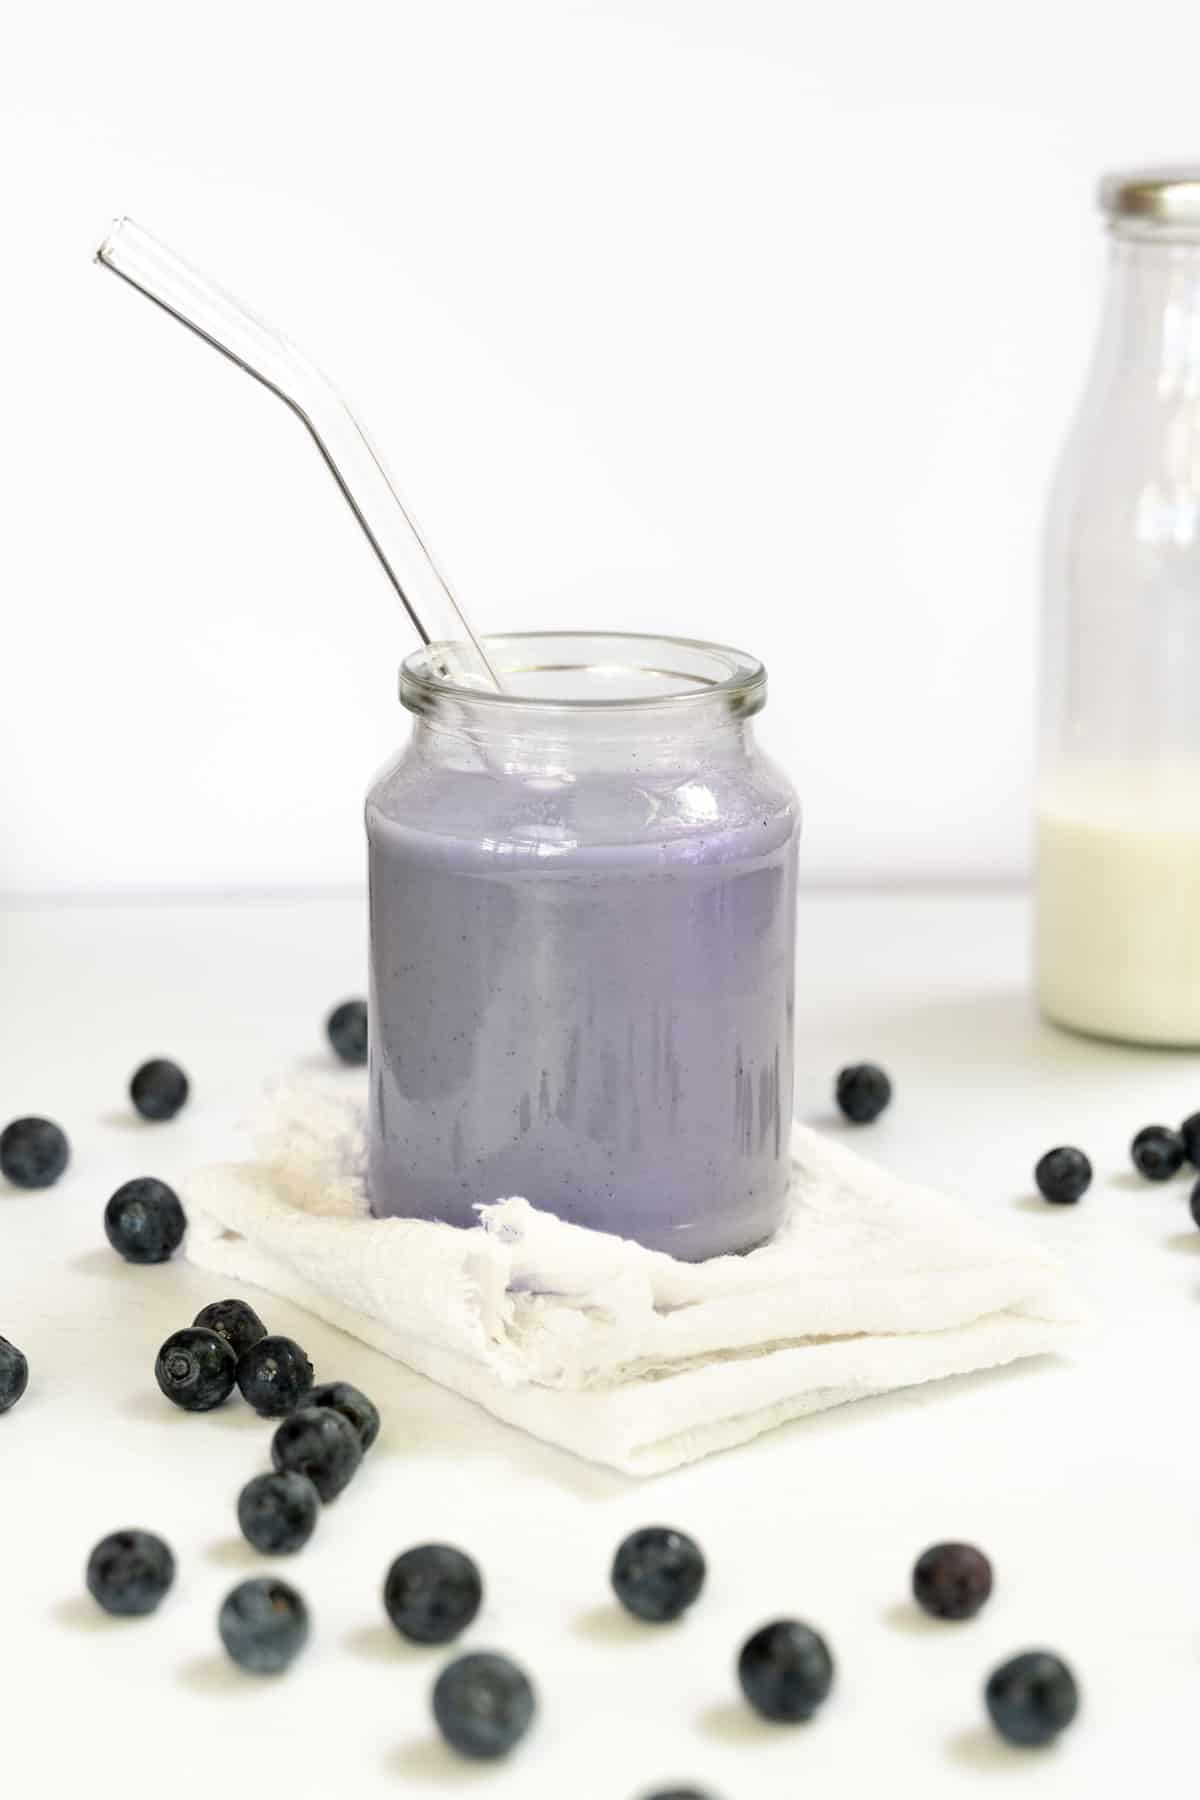 A glass cup with purple milk and blueberries strewn around it